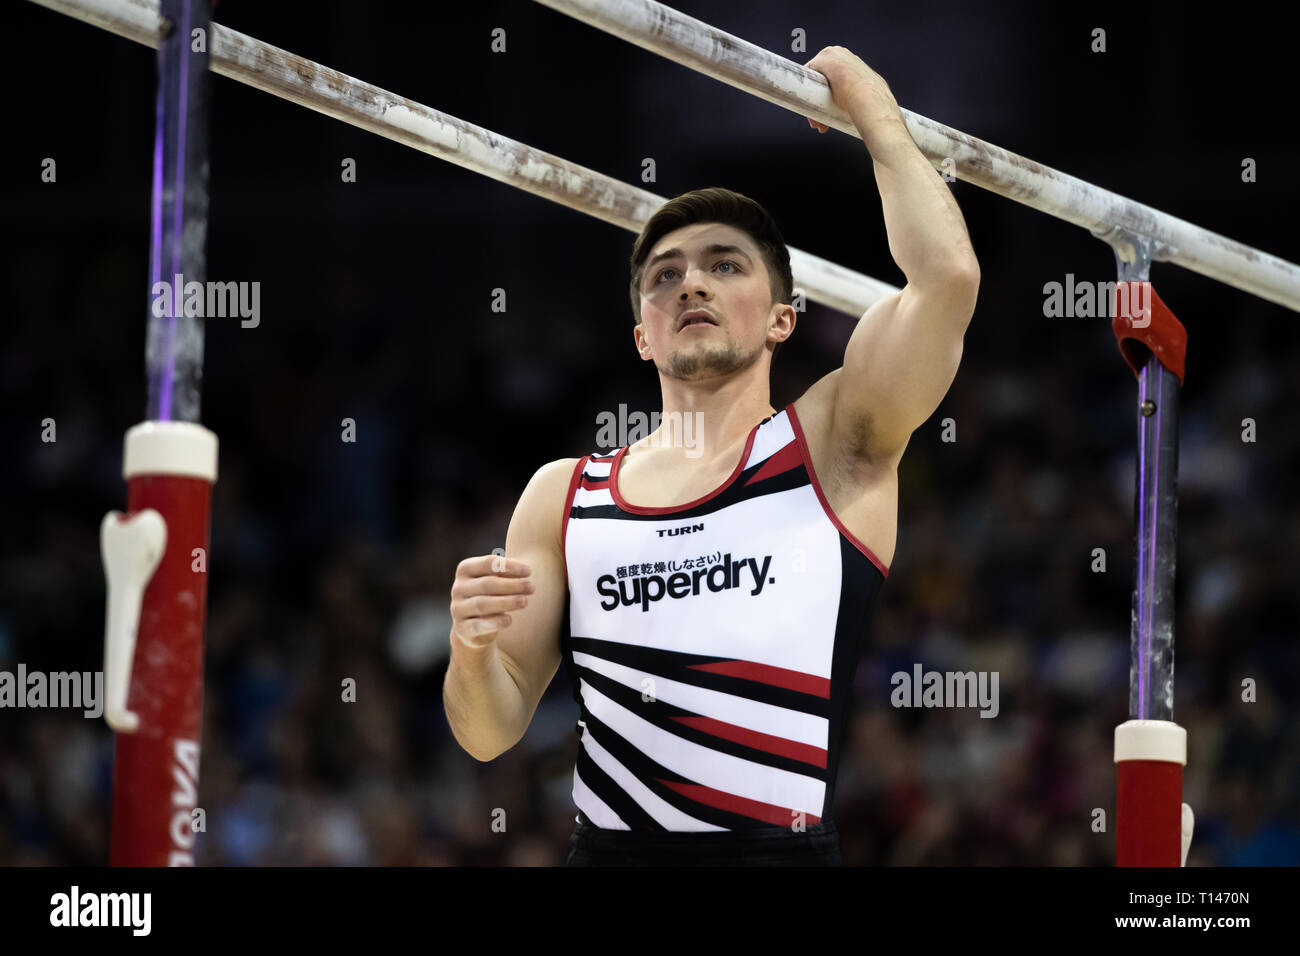 London, UK. 23rd March, 2019. Sam Oldman performs on the Parallel Bars during the Matchroom Multisport presents the 2019 Superstars of Gymnastics at The O2 Arena on Saturday, 23 March 2019. LONDON ENGLAND. Credit: Taka G Wu/Alamy News Stock Photo